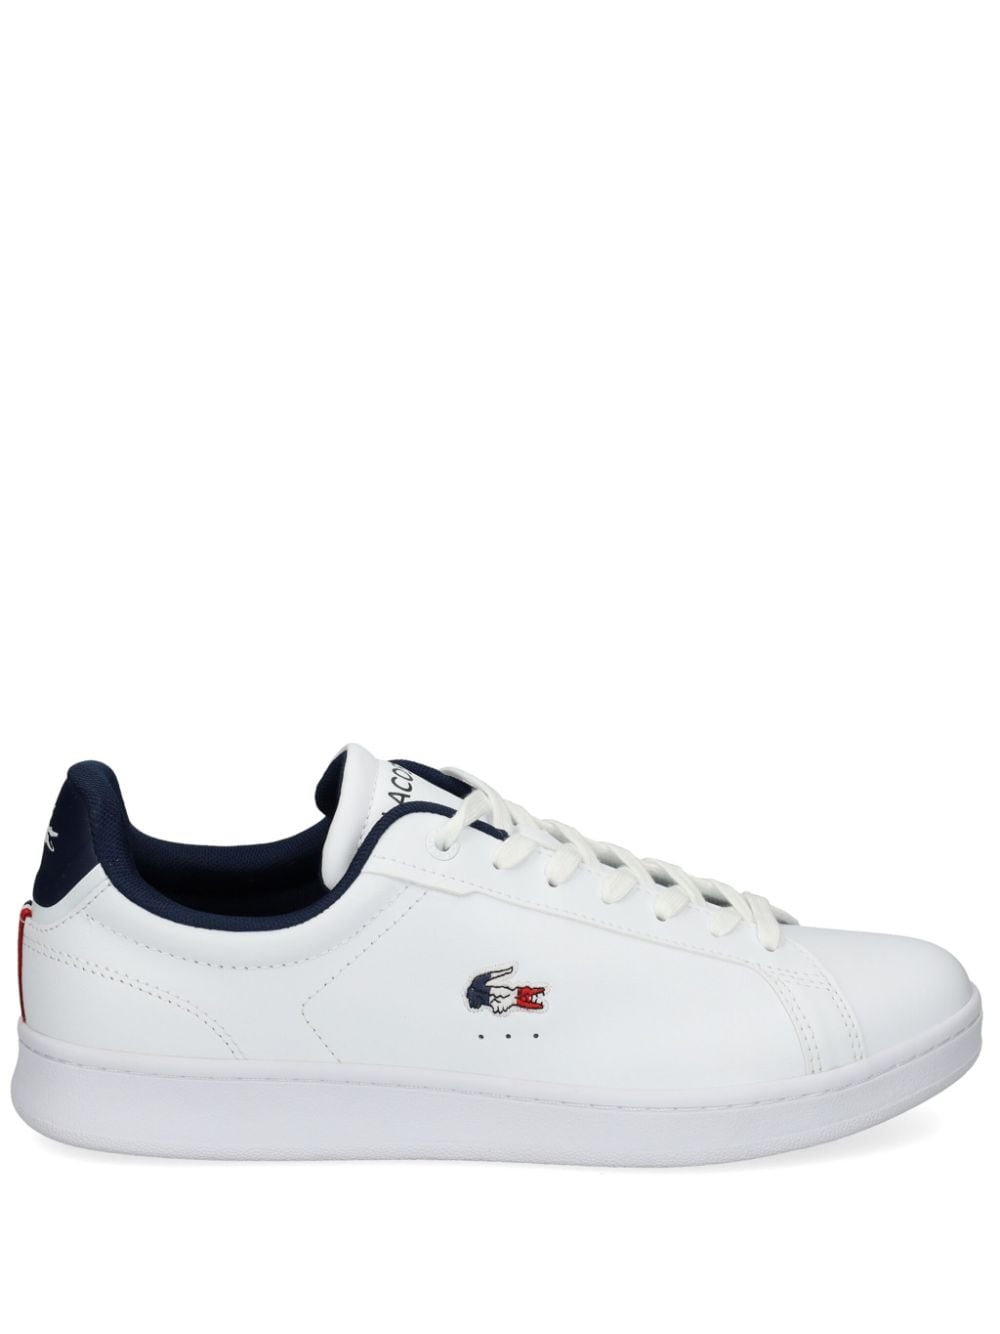 Lacoste Carnaby Pro leather sneakers - White von Lacoste